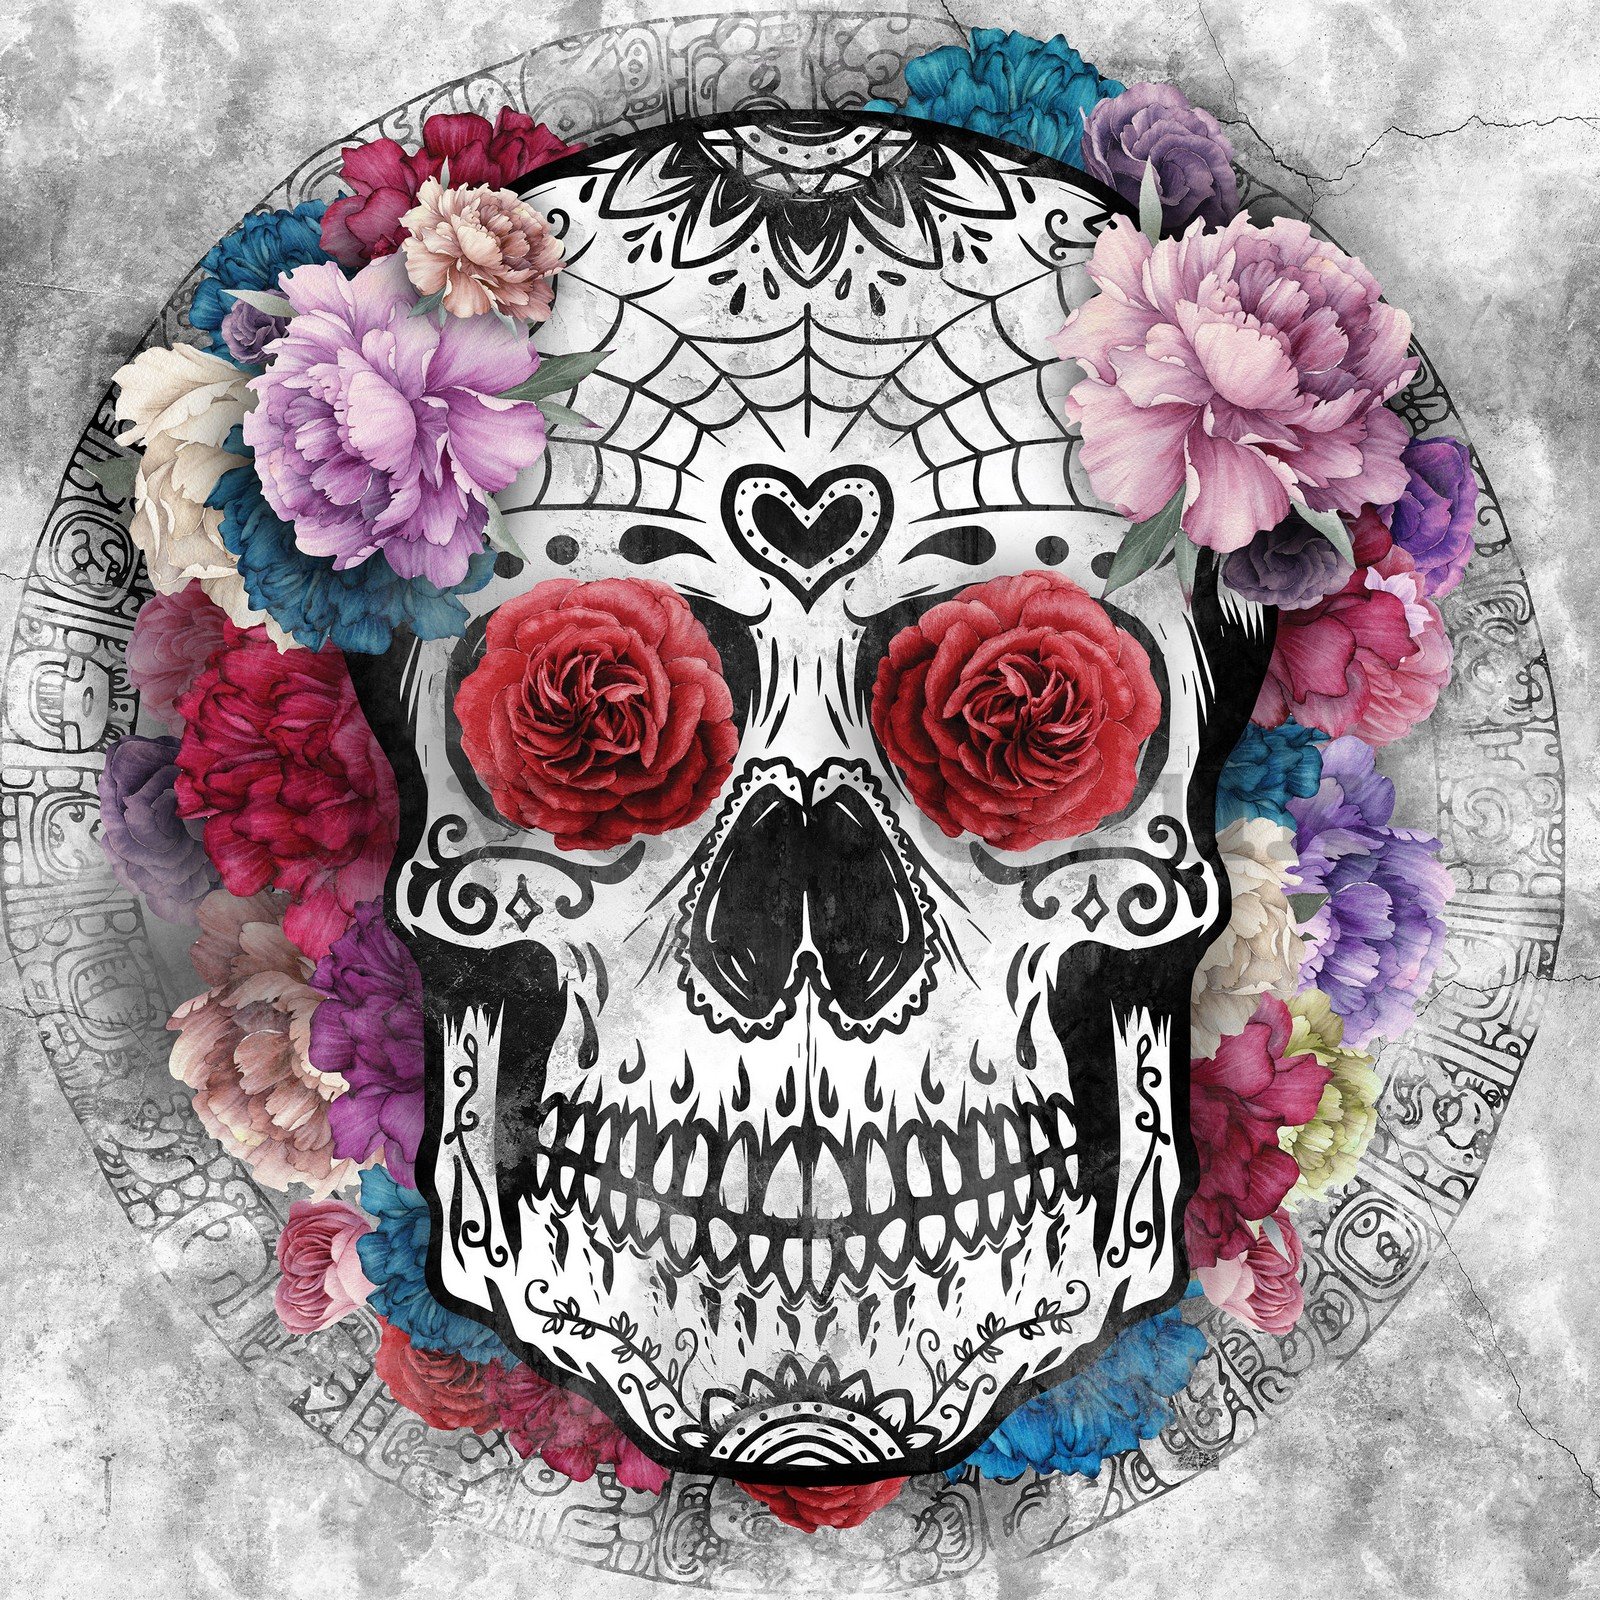 Wall mural vlies: Skull and Flowers - 254x184 cm